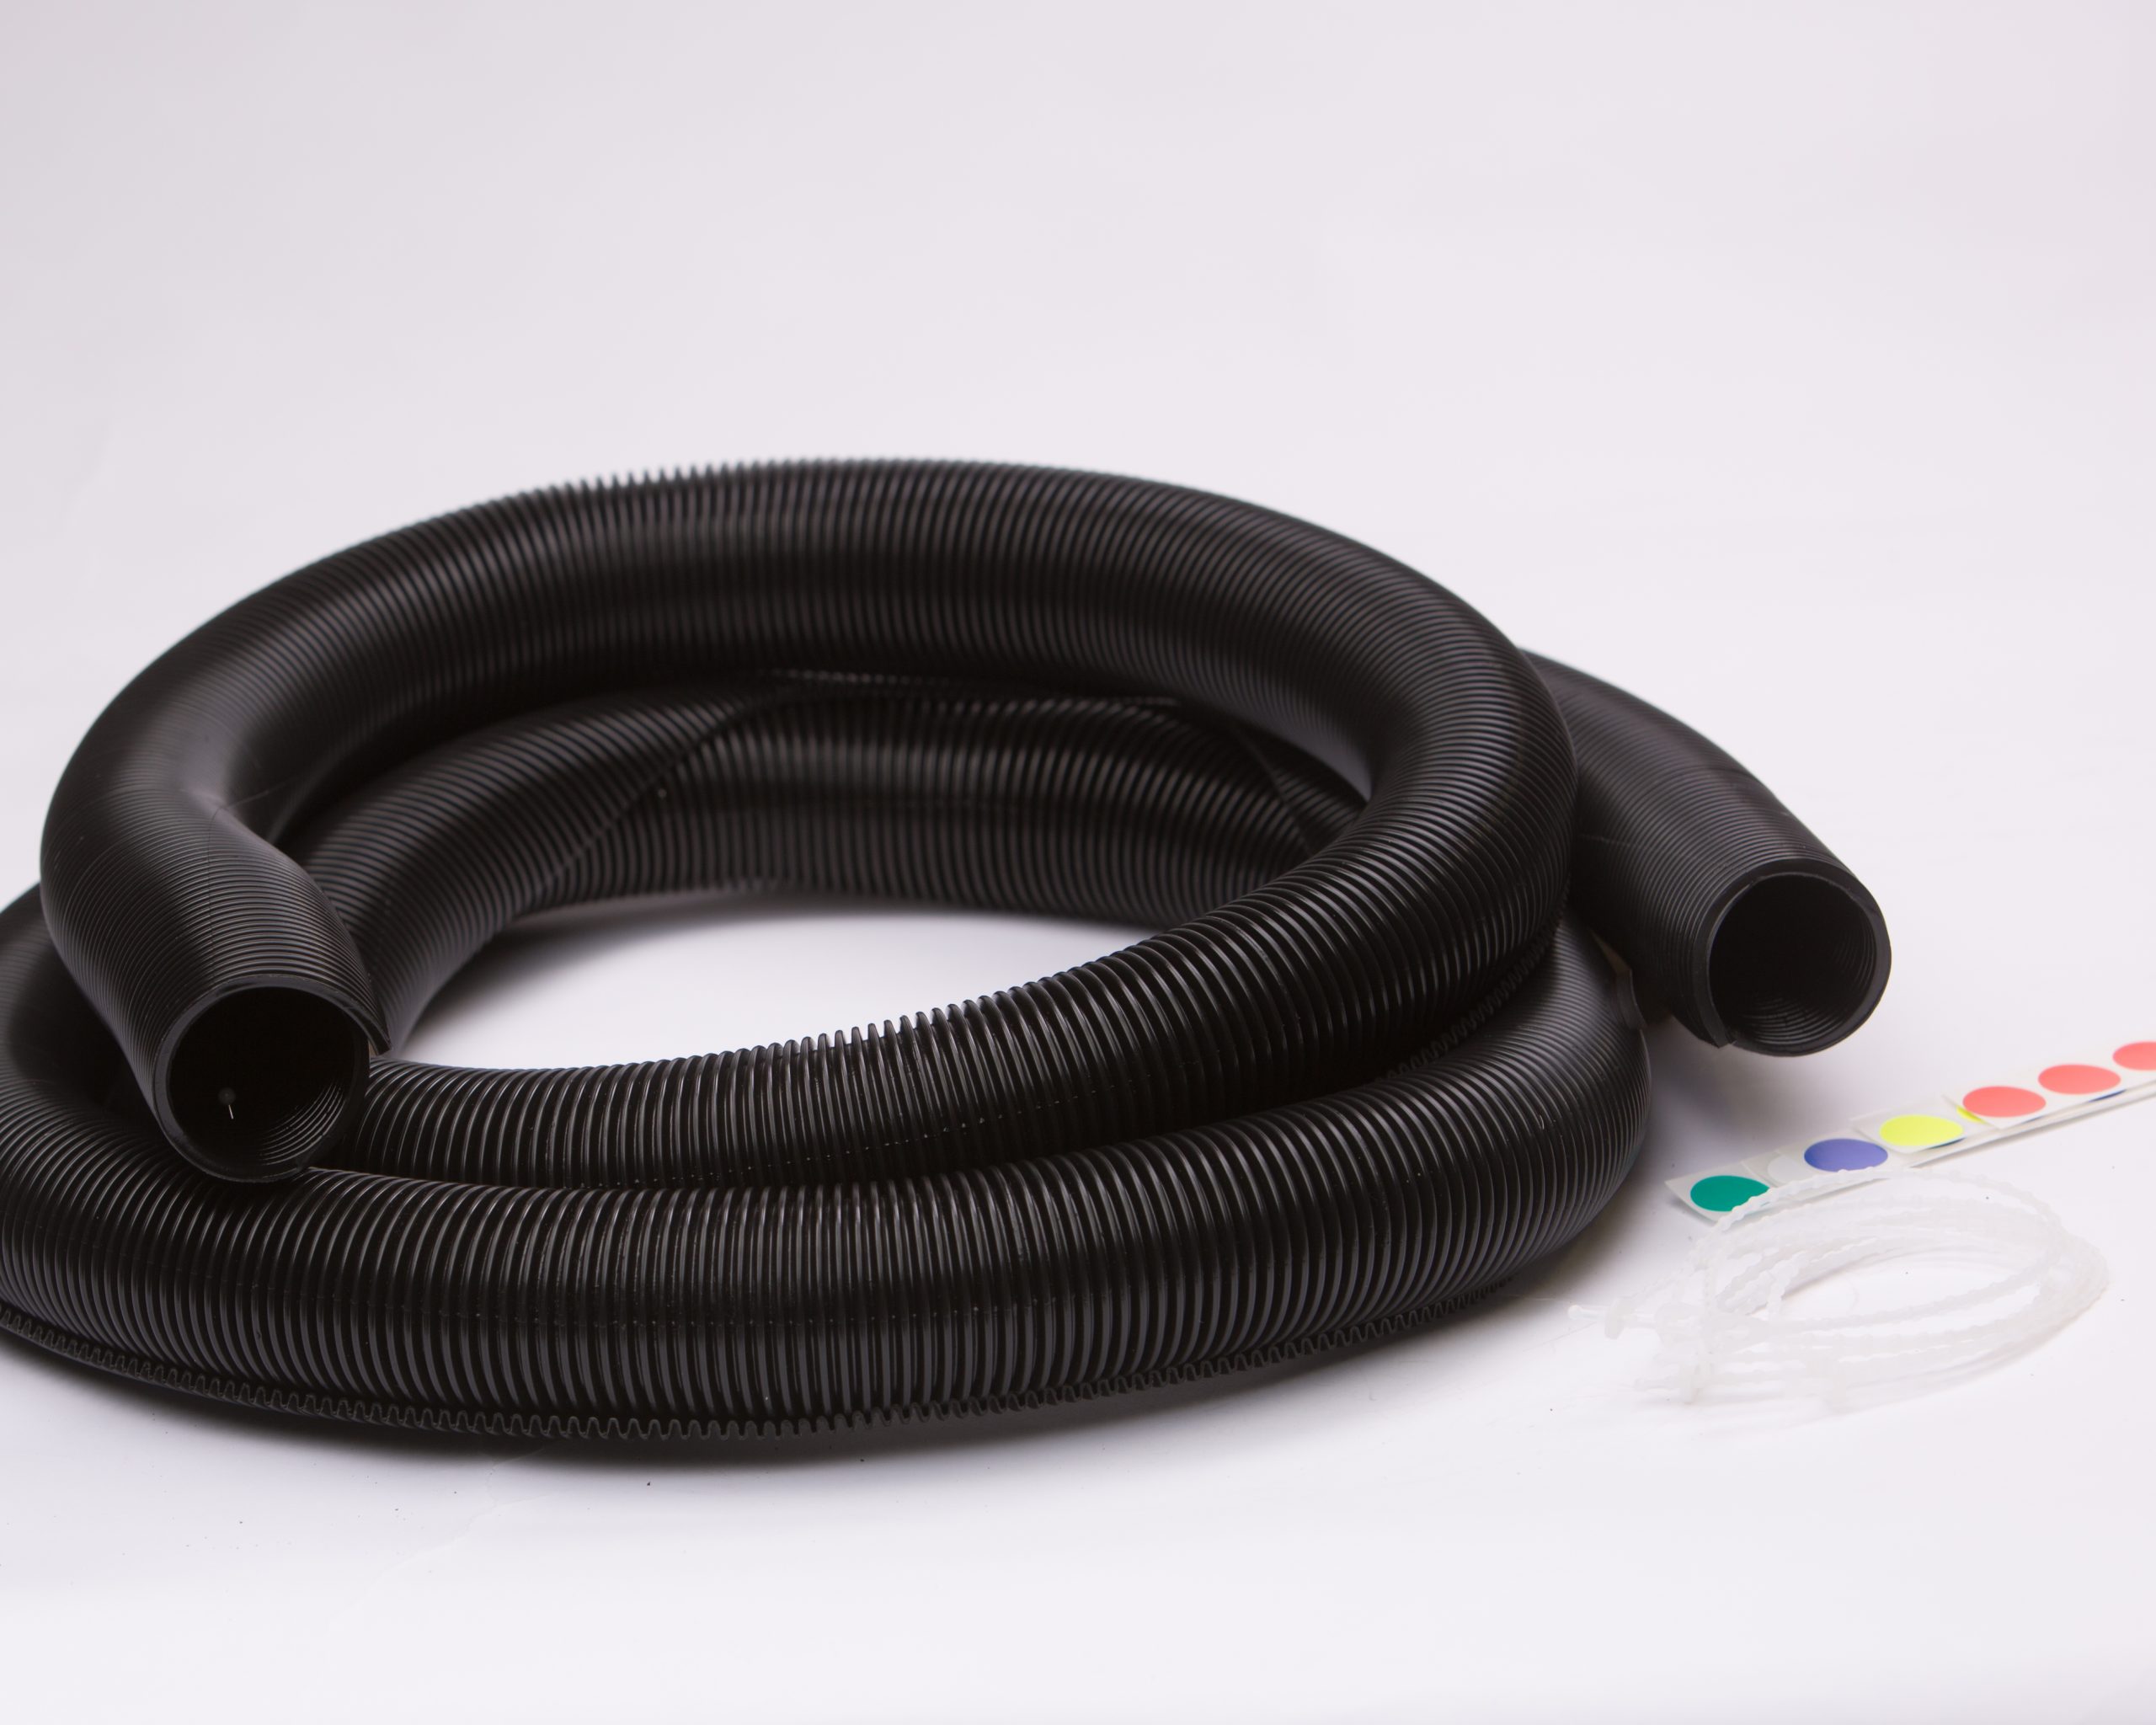 Lincoln Plastics 3/4 Inch Cord Cover - Flexible Cable Management Solut